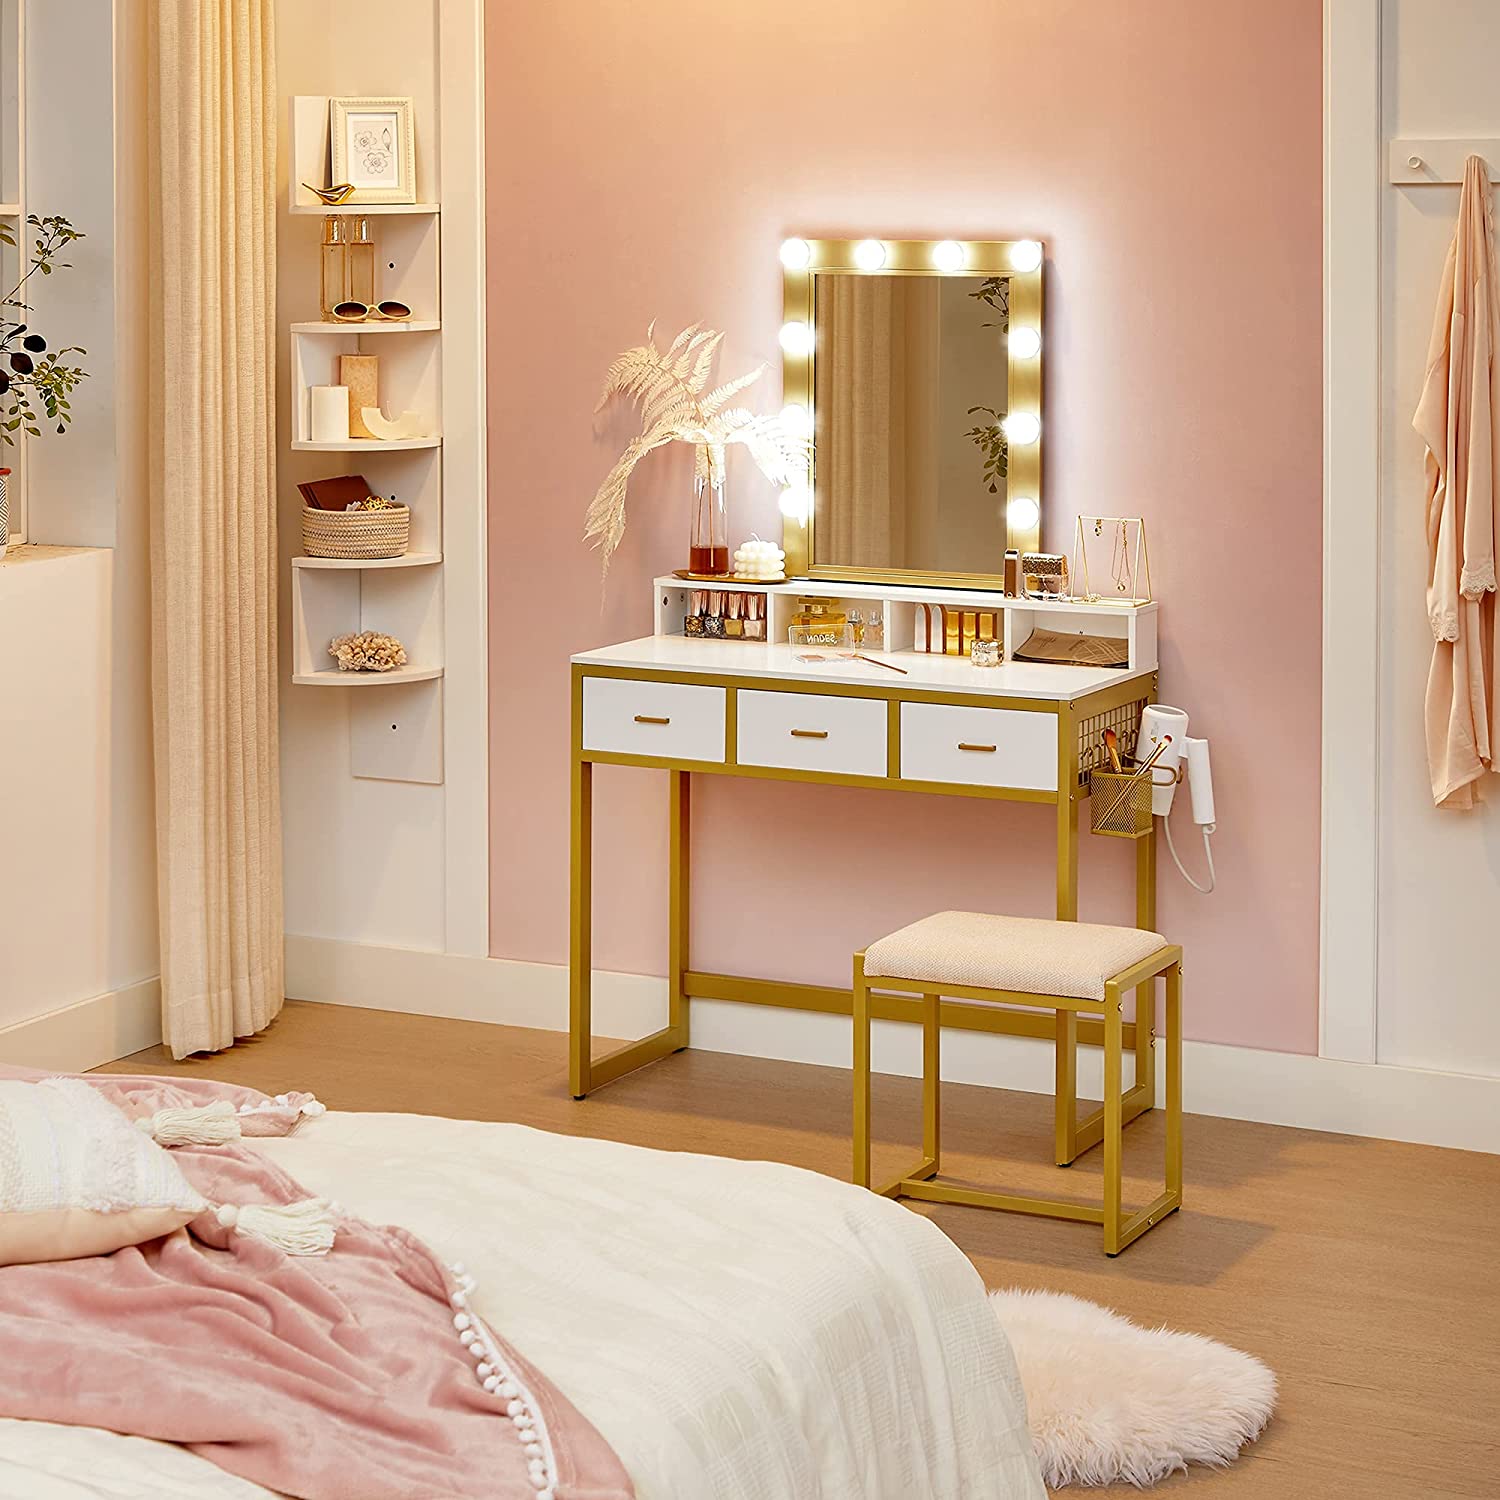 Nancy's Caribou Dressing Table - Cosmetics Table - Stool - 10 LED Lamps - Mirror - 3 Drawers - White - Gold - 90 x 40 x 145.5 cm